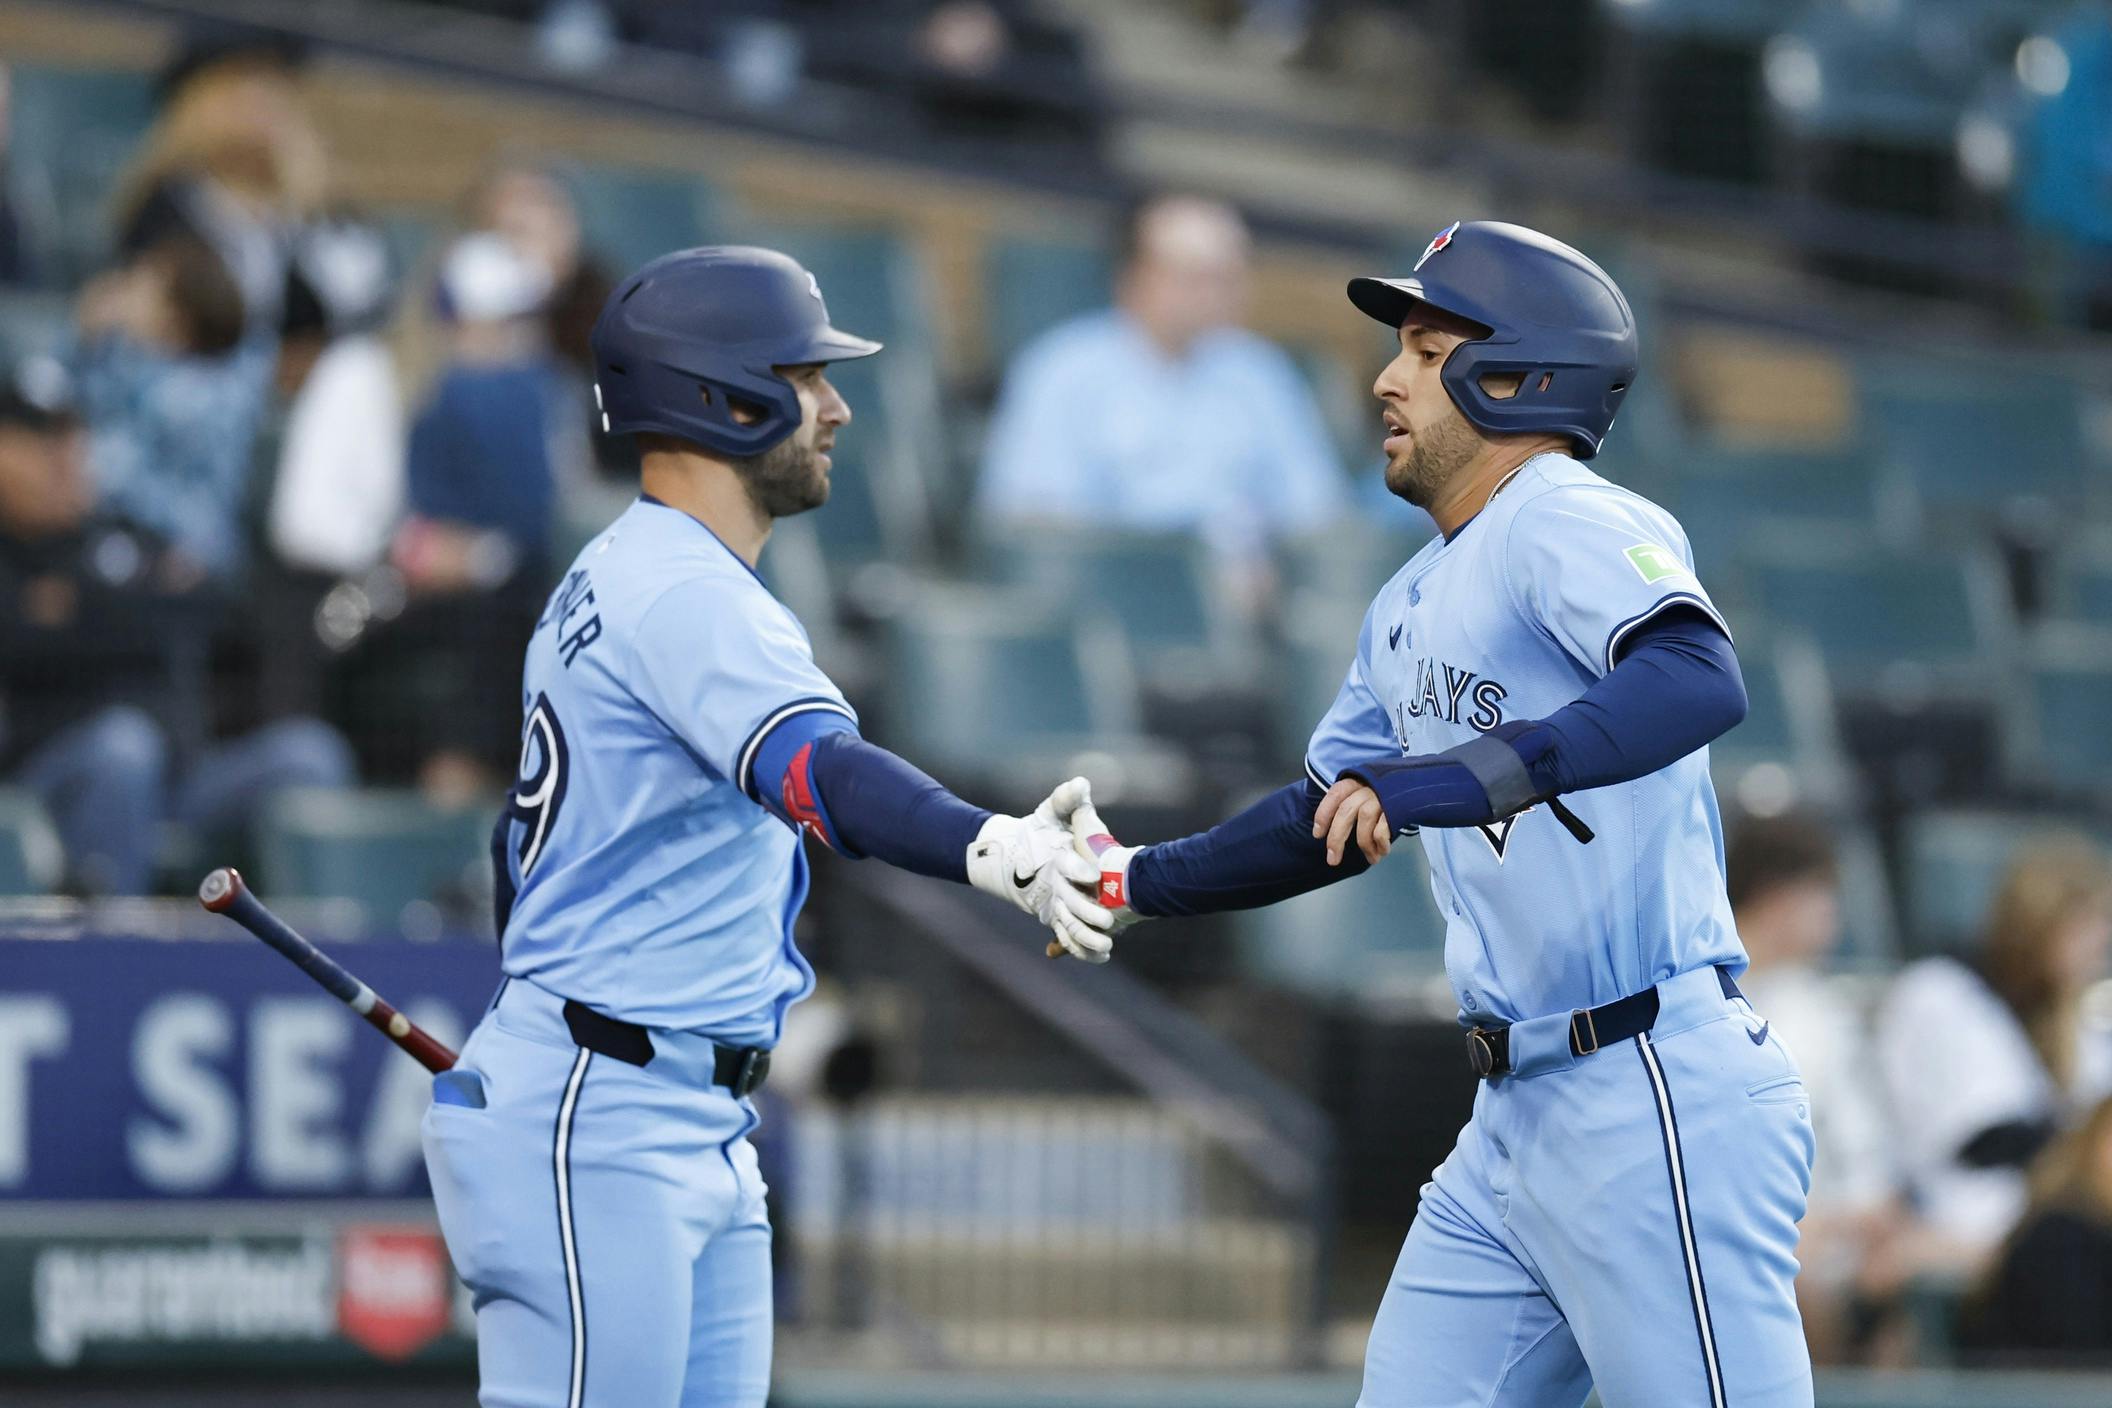 Toronto Blue Jays outfielder George Springer (4) celebrates with outfielder Kevin Kiermaier (39) after scoring against the Chicago White Sox during the fourth inning at Guaranteed Rate Field.